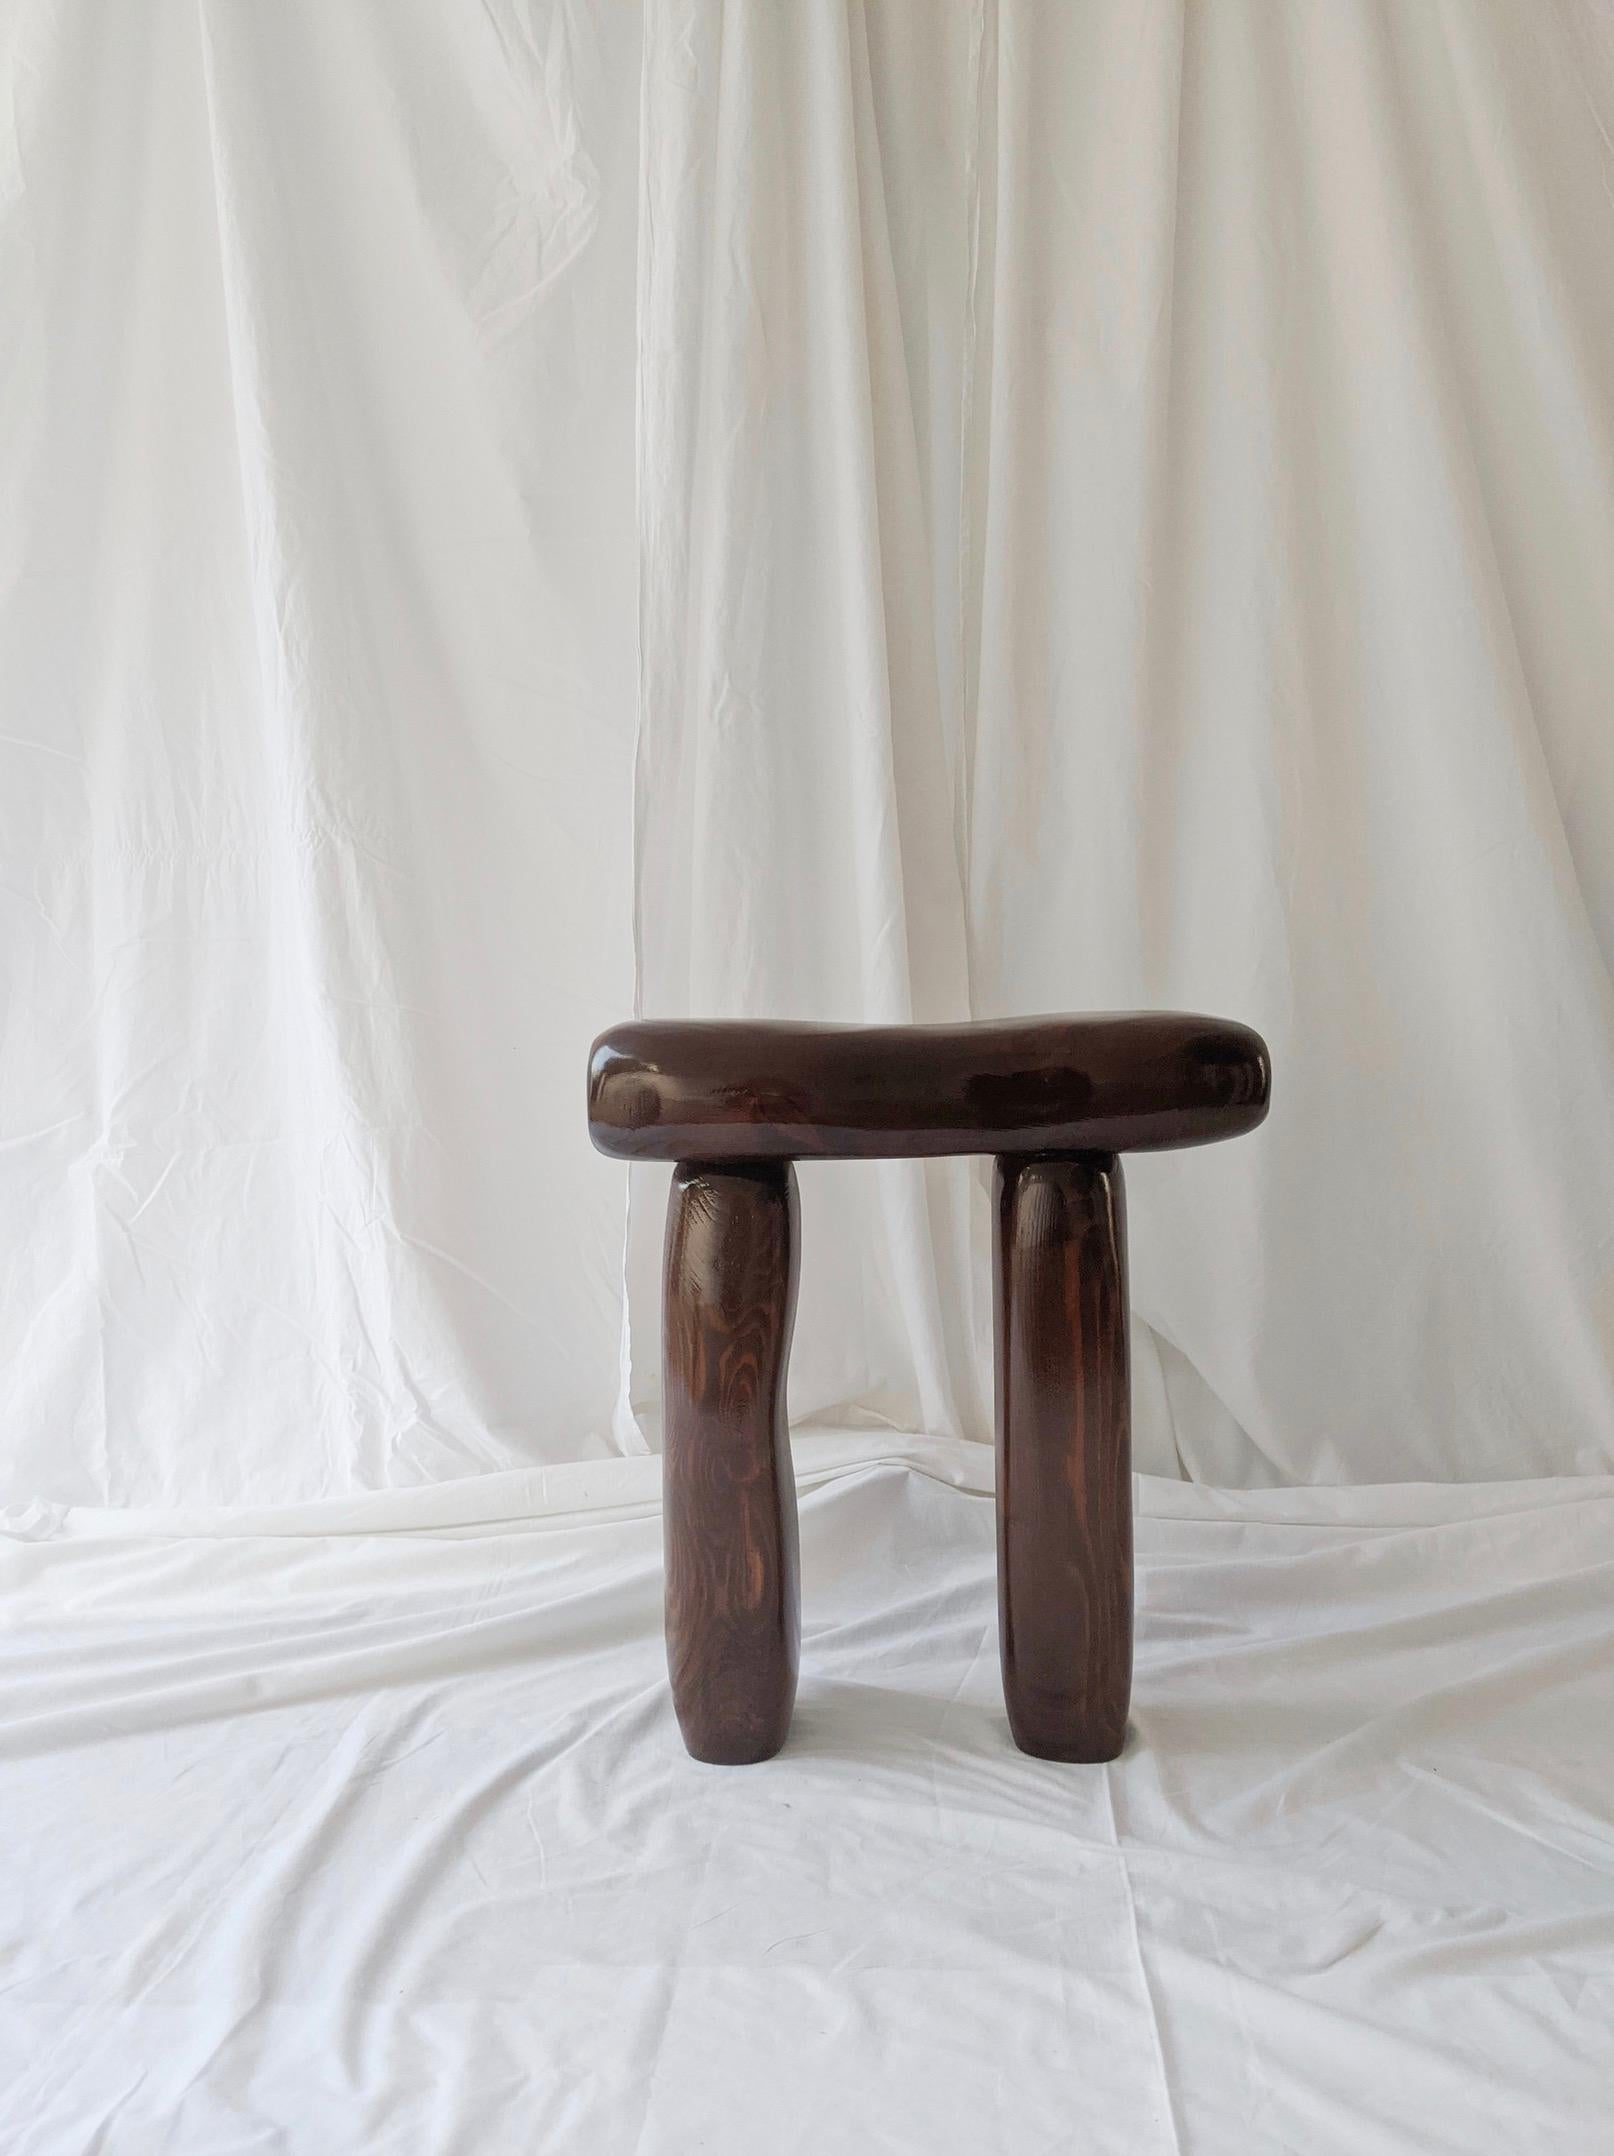 Contemporary Limbs Wood Stool by the Stone by the Door 'American oak version' For Sale